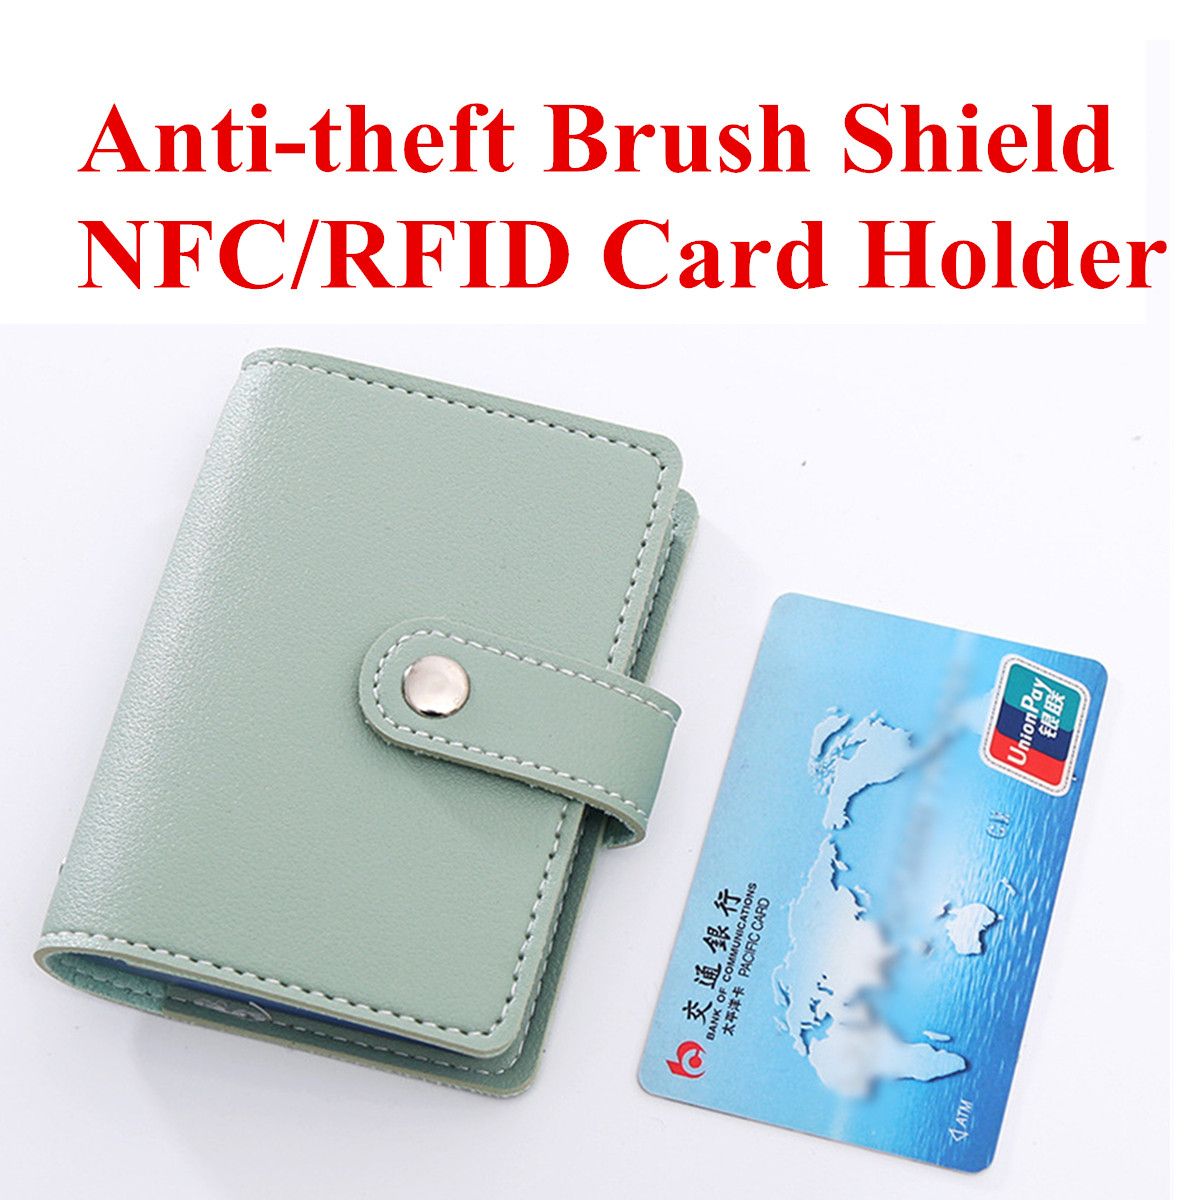 26-Card-Slots-Portable-Leather-Wallet-Anti-theft-Brush-Shield-NFCRFID-Card-Holder-1644277